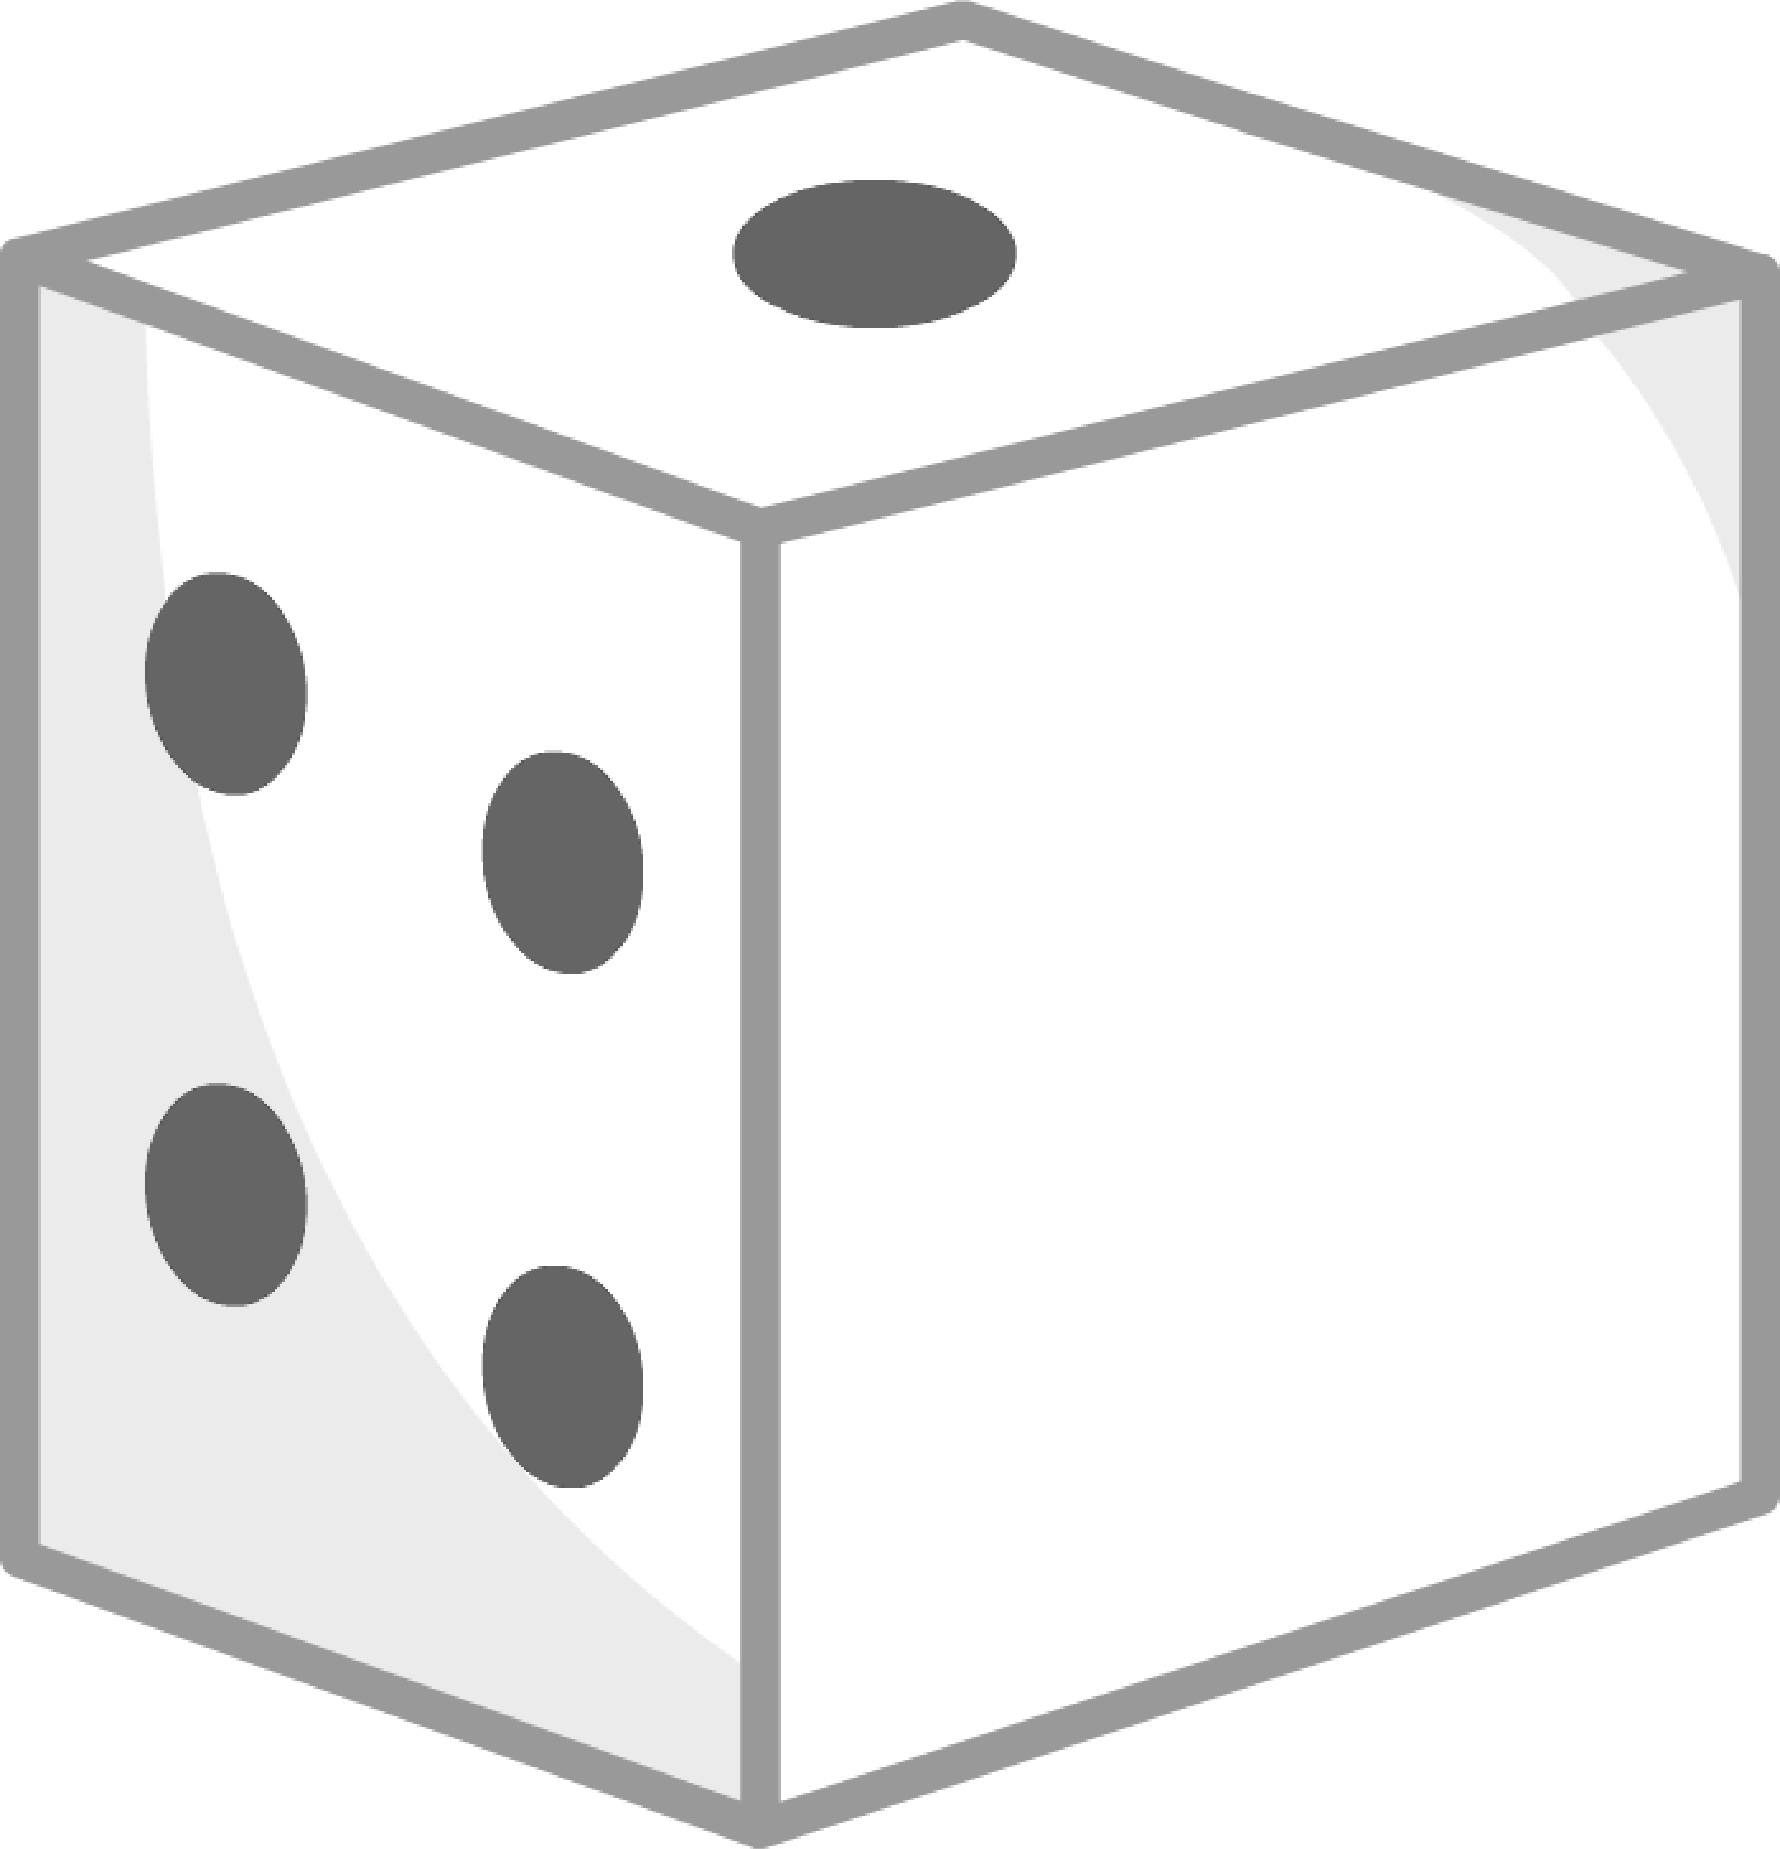 dice clipart dice number